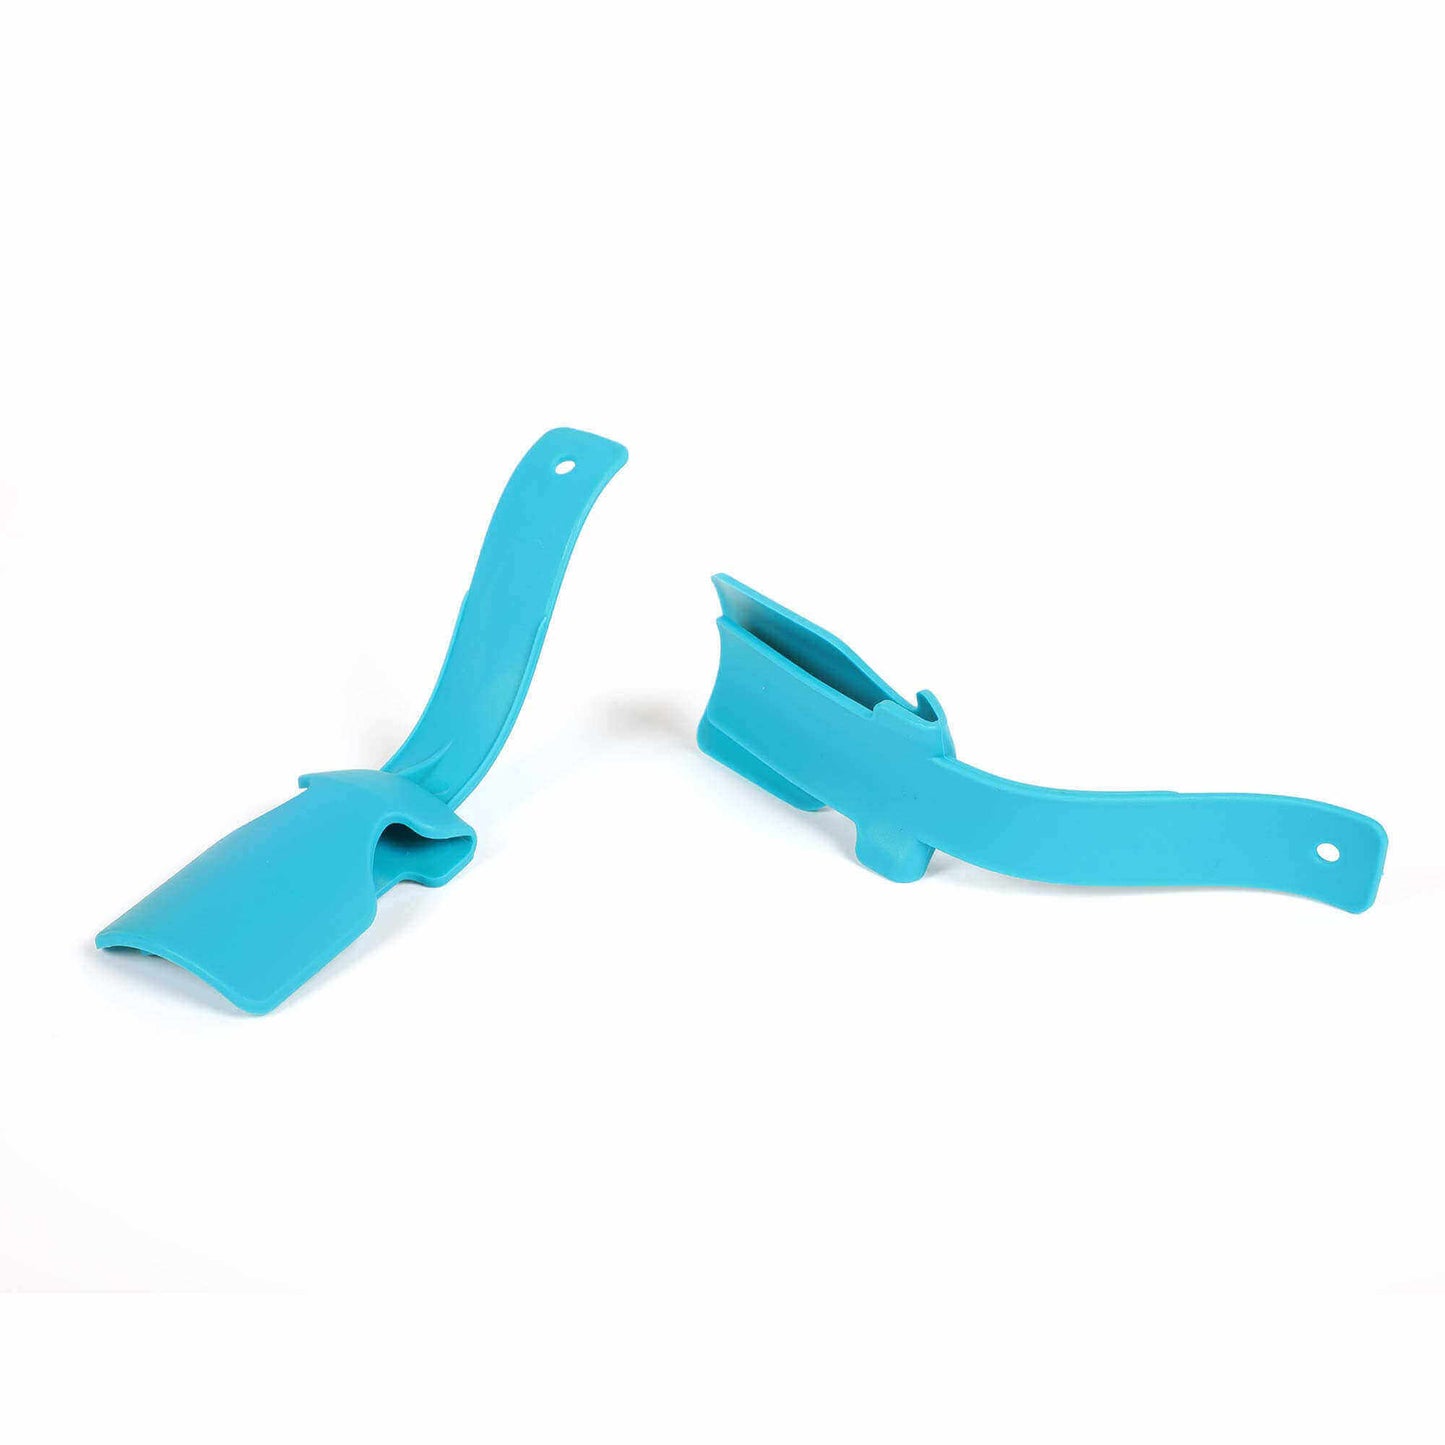 7'' Inch Short Plastic Shoe Horn for Dressing Aid for Sale, 2 pieces of the item